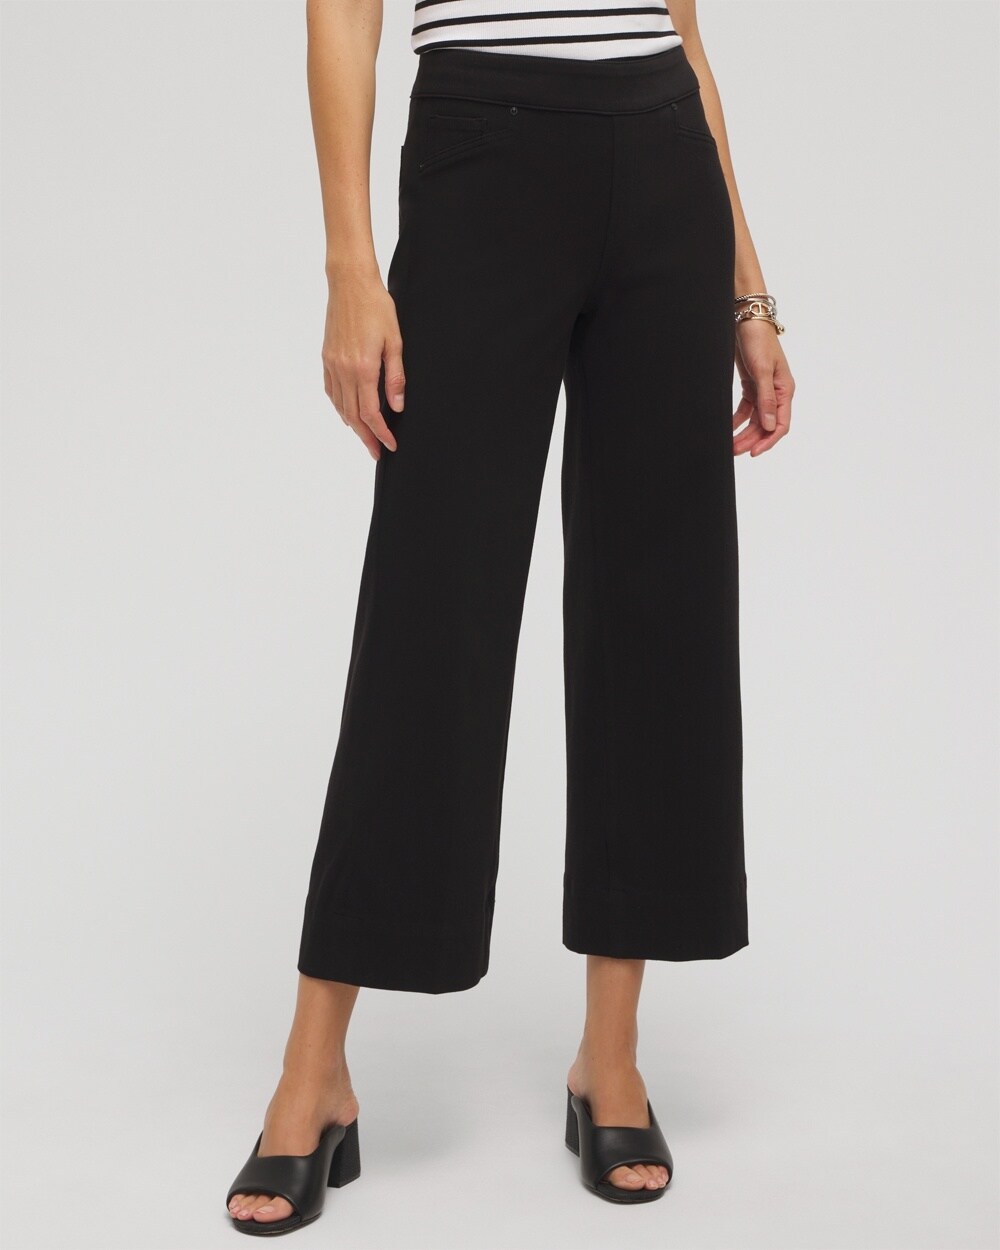 Chico's Travelers Pull On Cropped Jeans In Black Size 4p/6p |  Travel Clothing